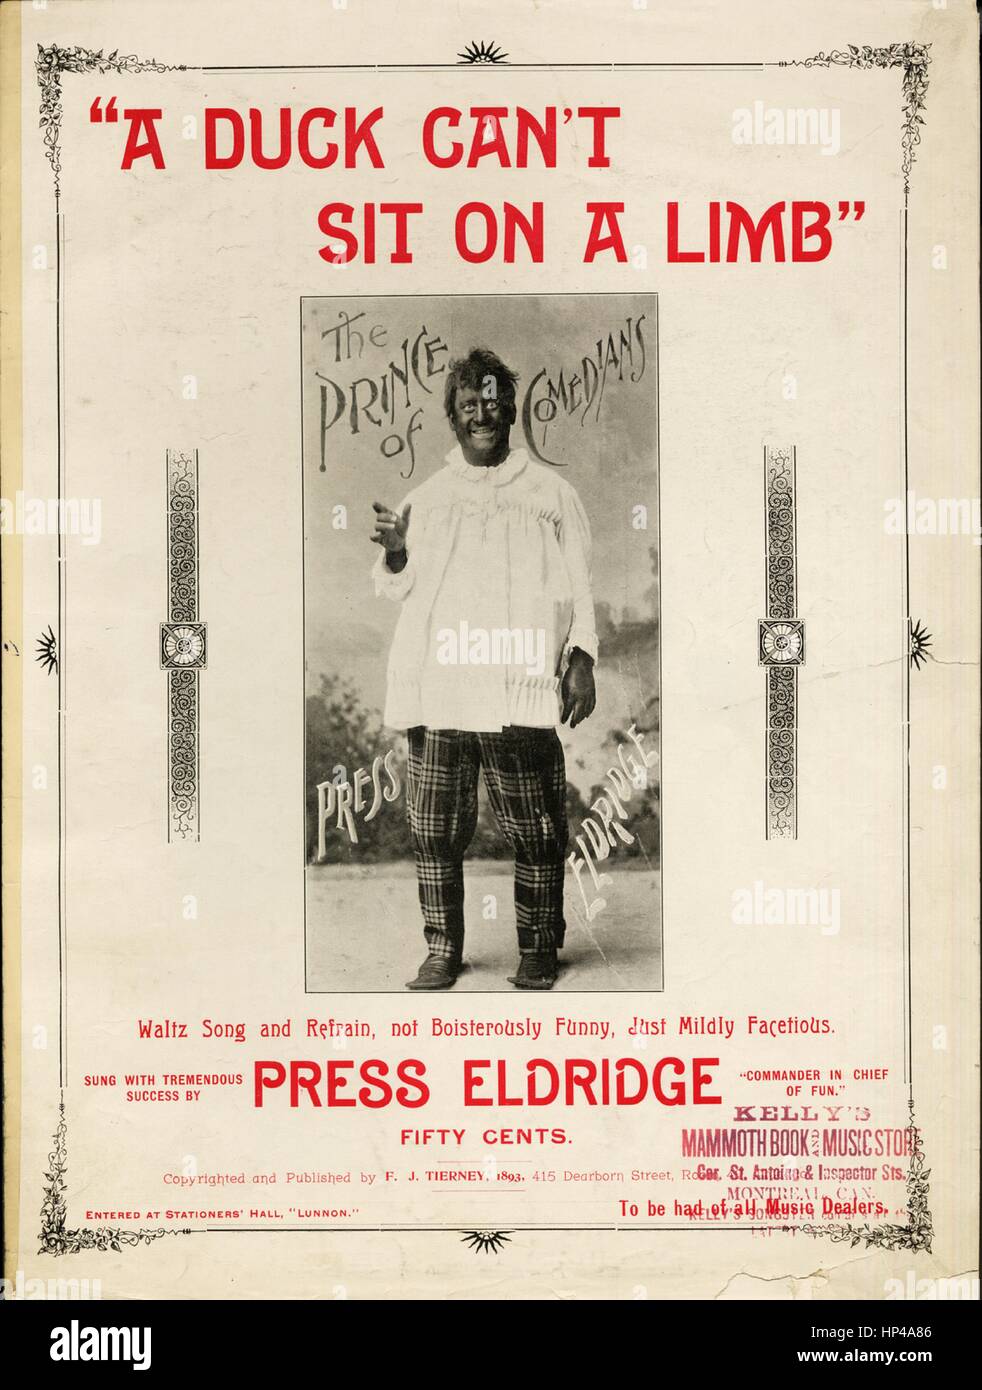 Sheet music cover image of the song 'A Duck Can't Sit on a Limb Waltz Song  and Refrain, not Boisterously Funny, Just Mildly Facetious', with original  authorship notes reading 'Words and Music